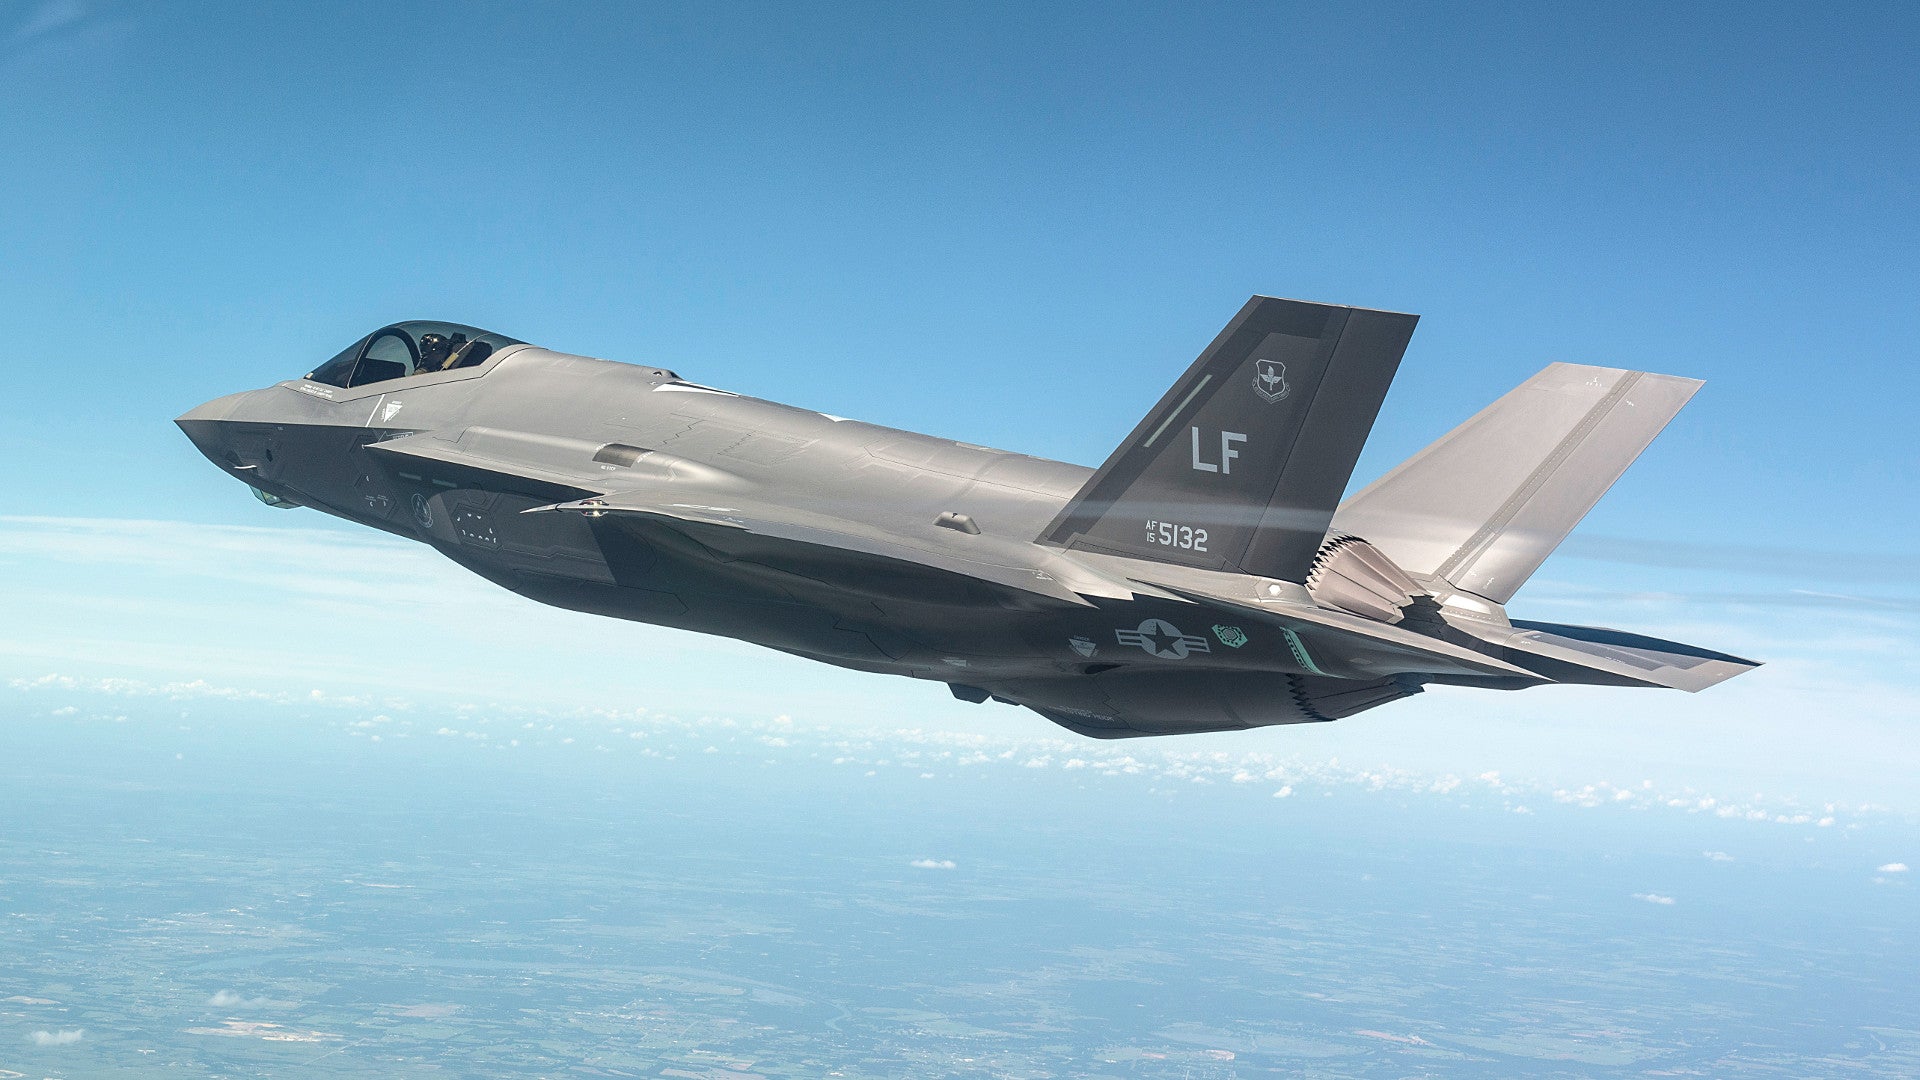 Germany Says the F-35 is the “Preferred Choice” to Replace its Tornados